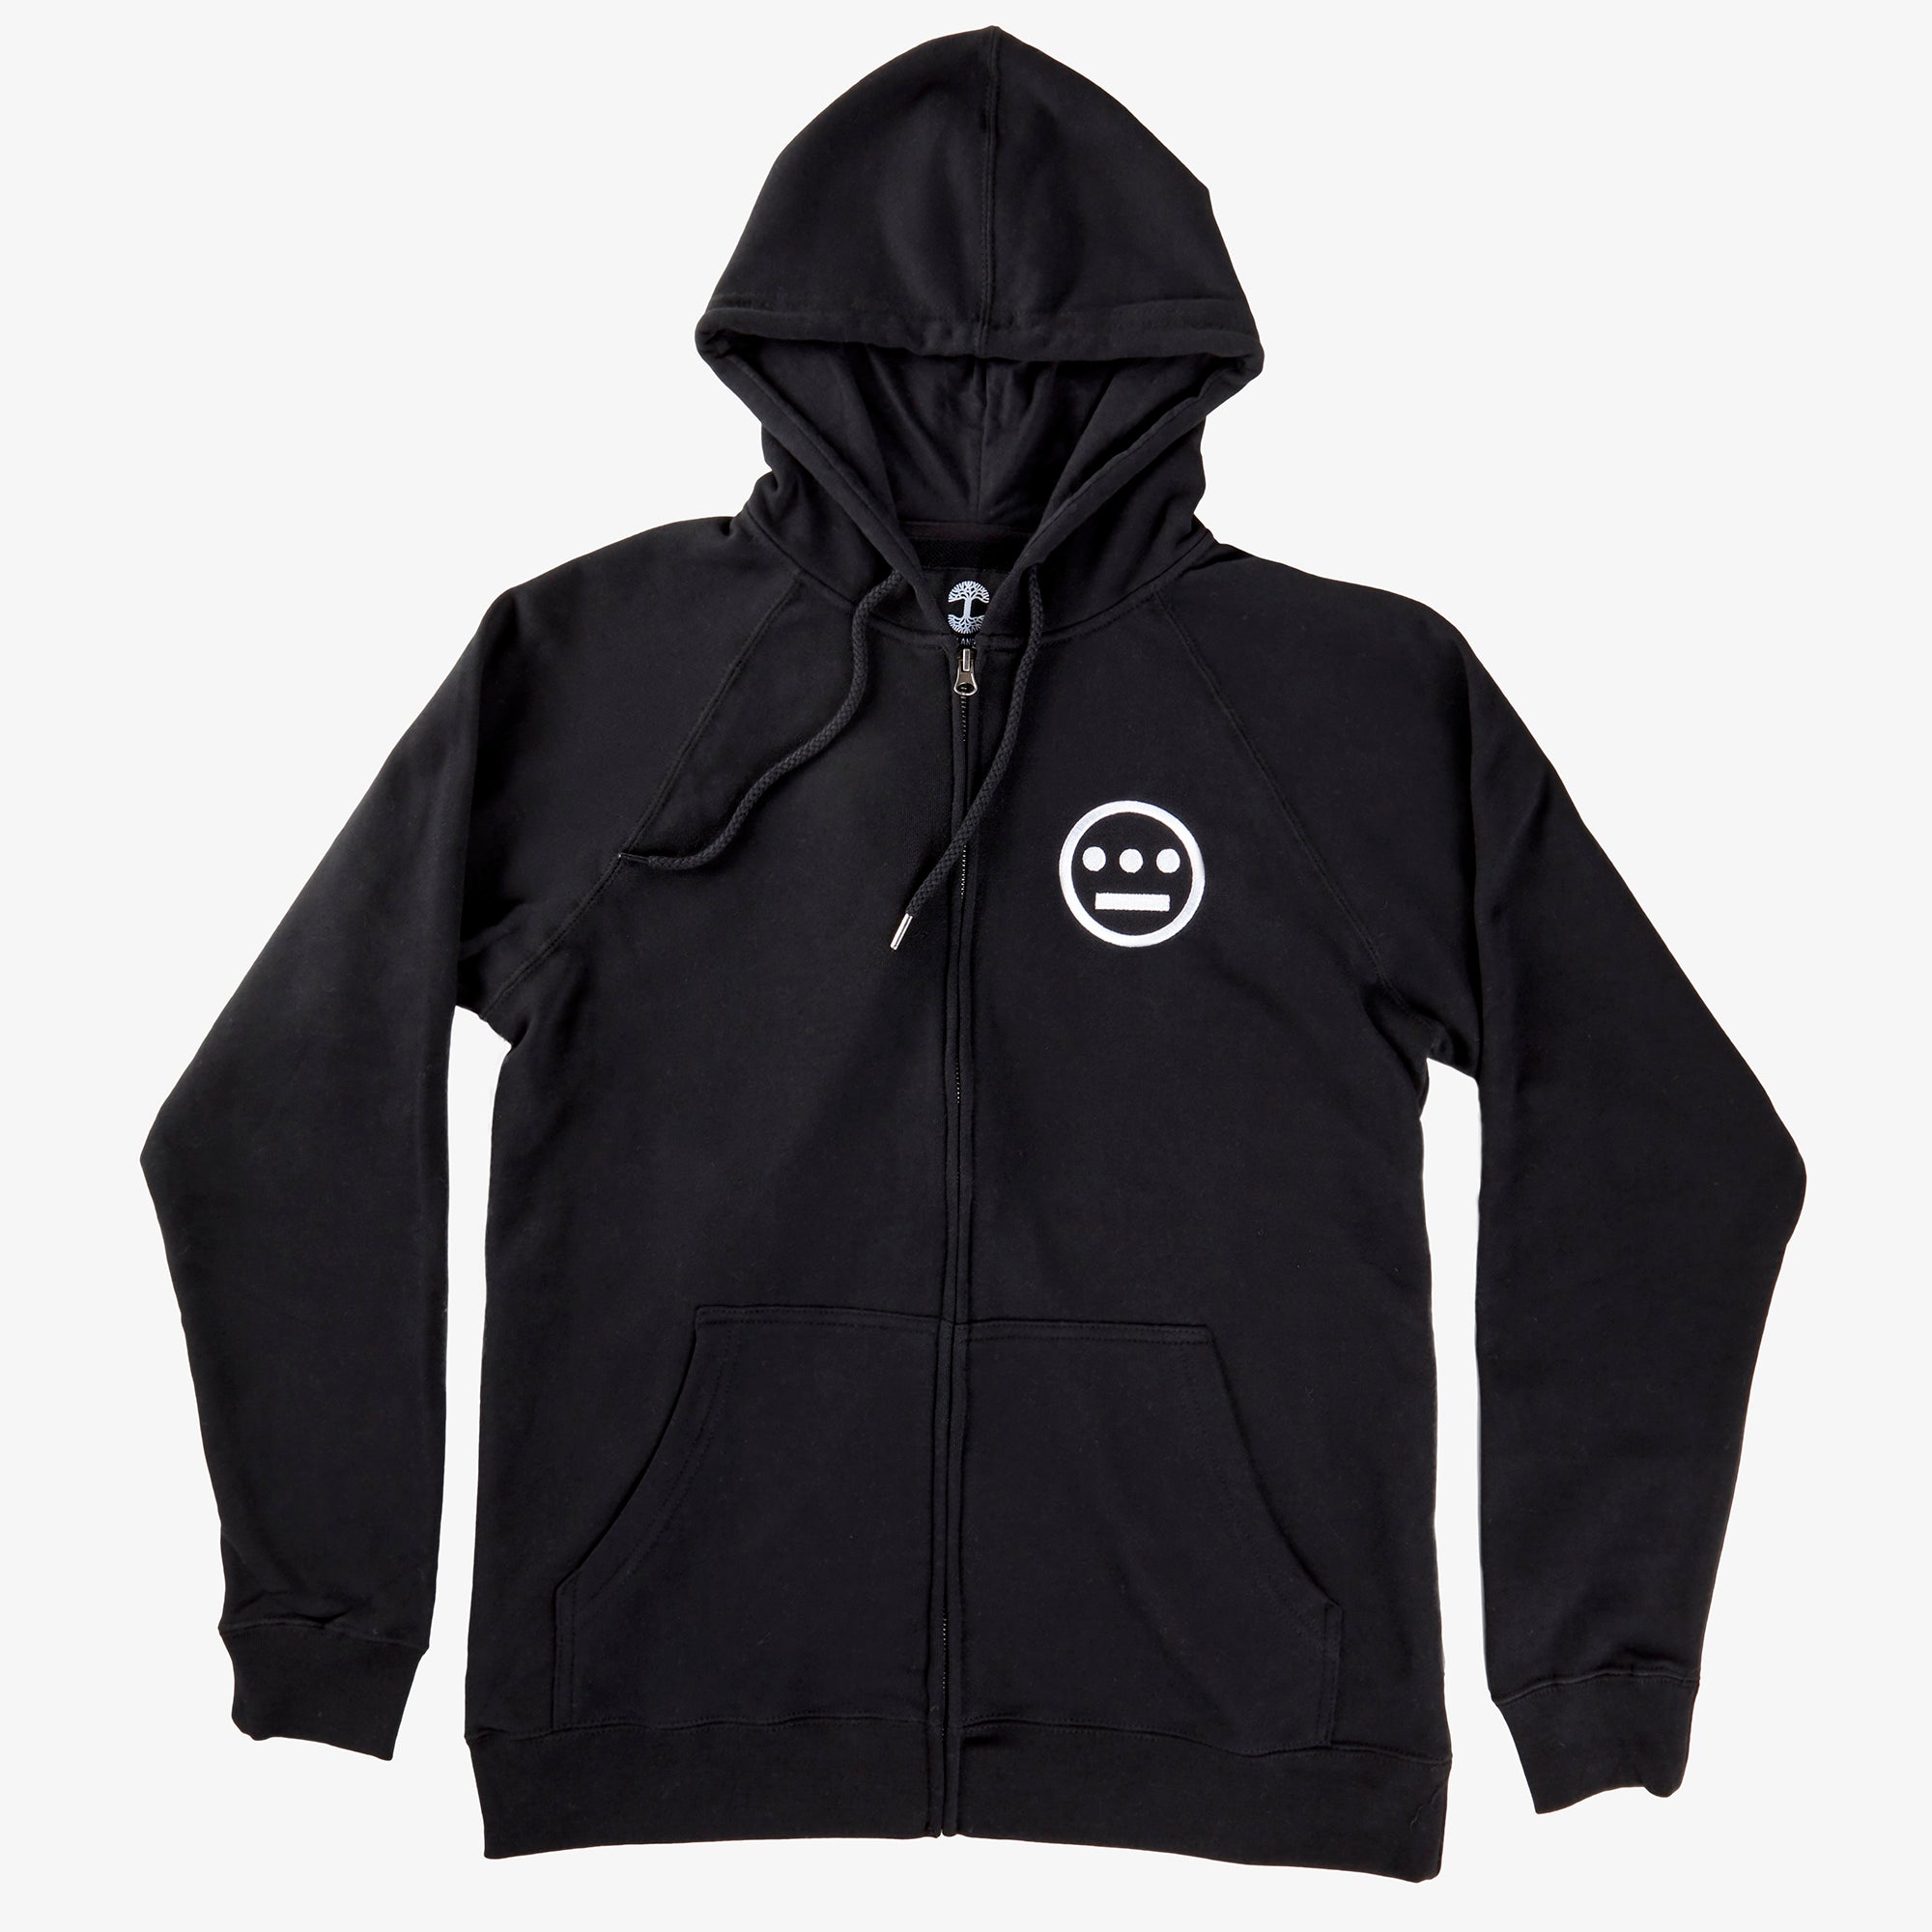 Black zip-up hoodie with white Hieroglyphics hip hop logo on left chest wear side.